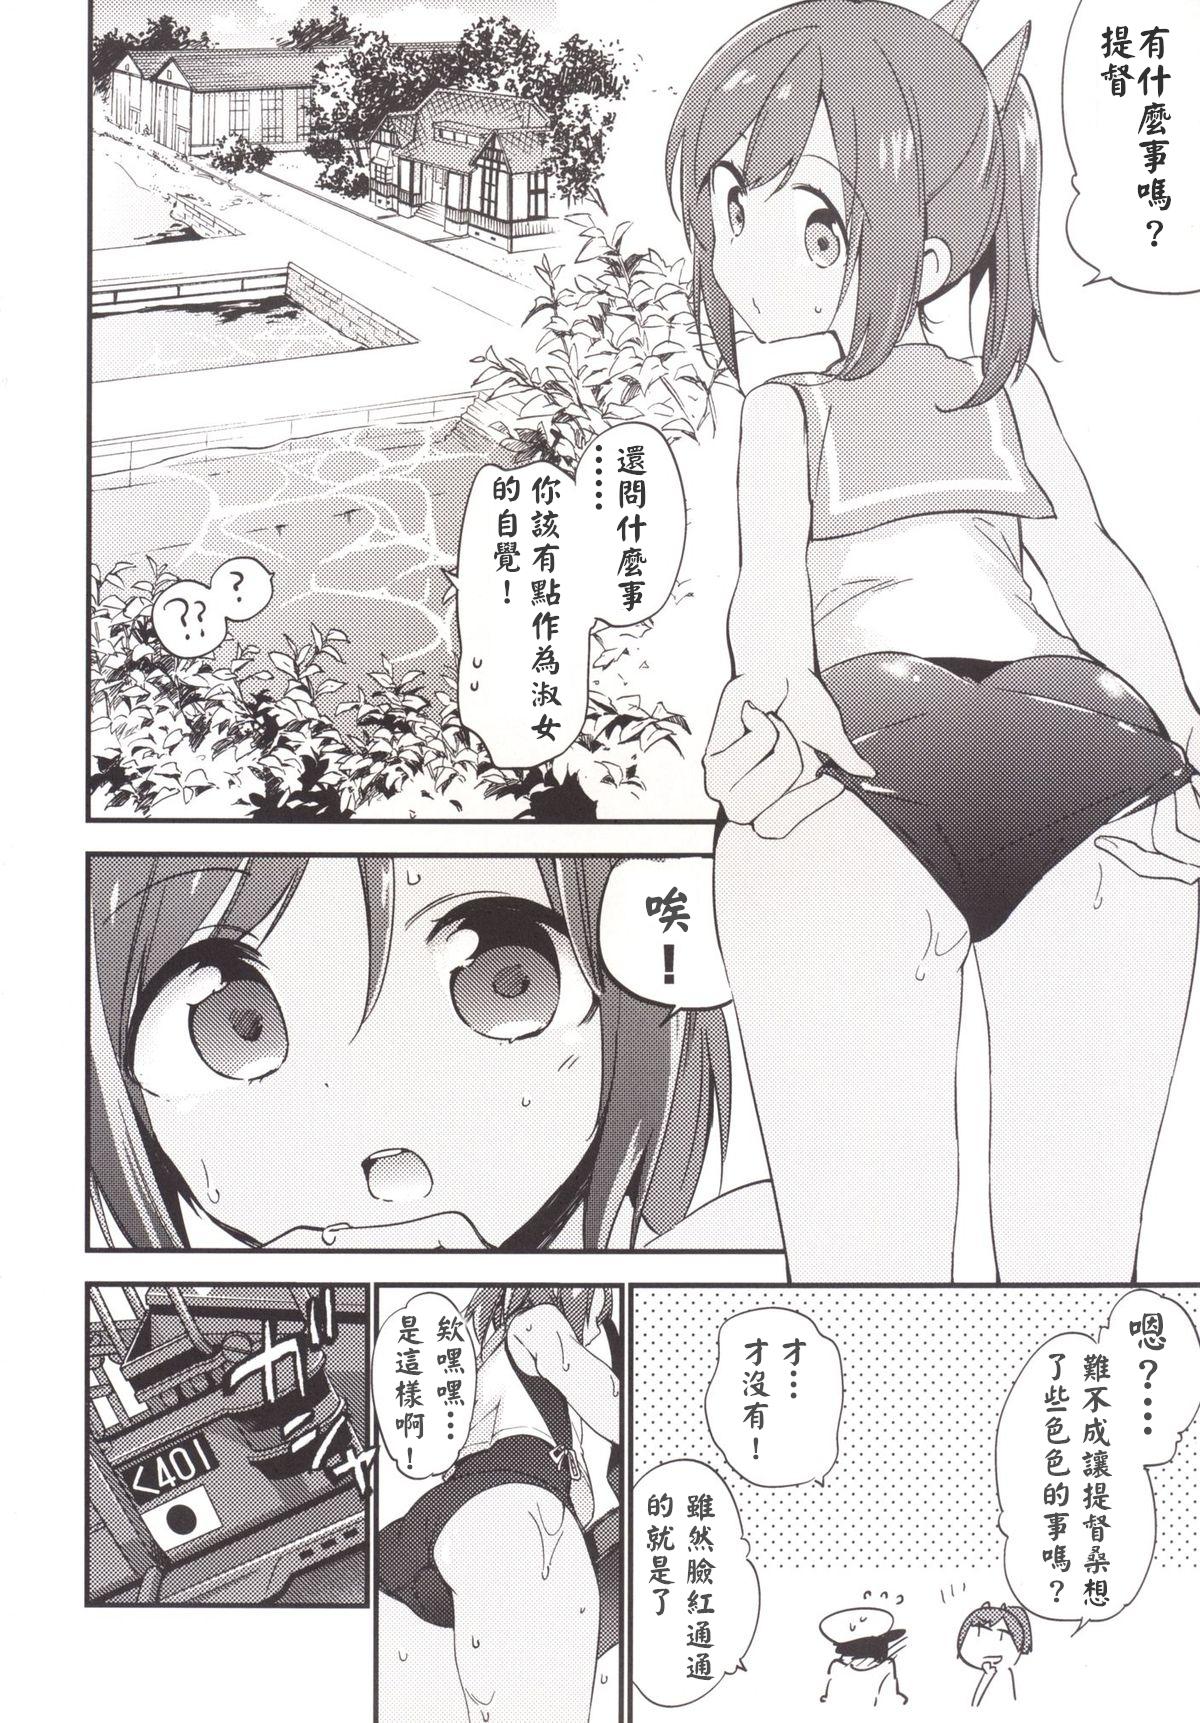 Sologirl 401-chan to Issho! - Kantai collection Eurosex - Page 6